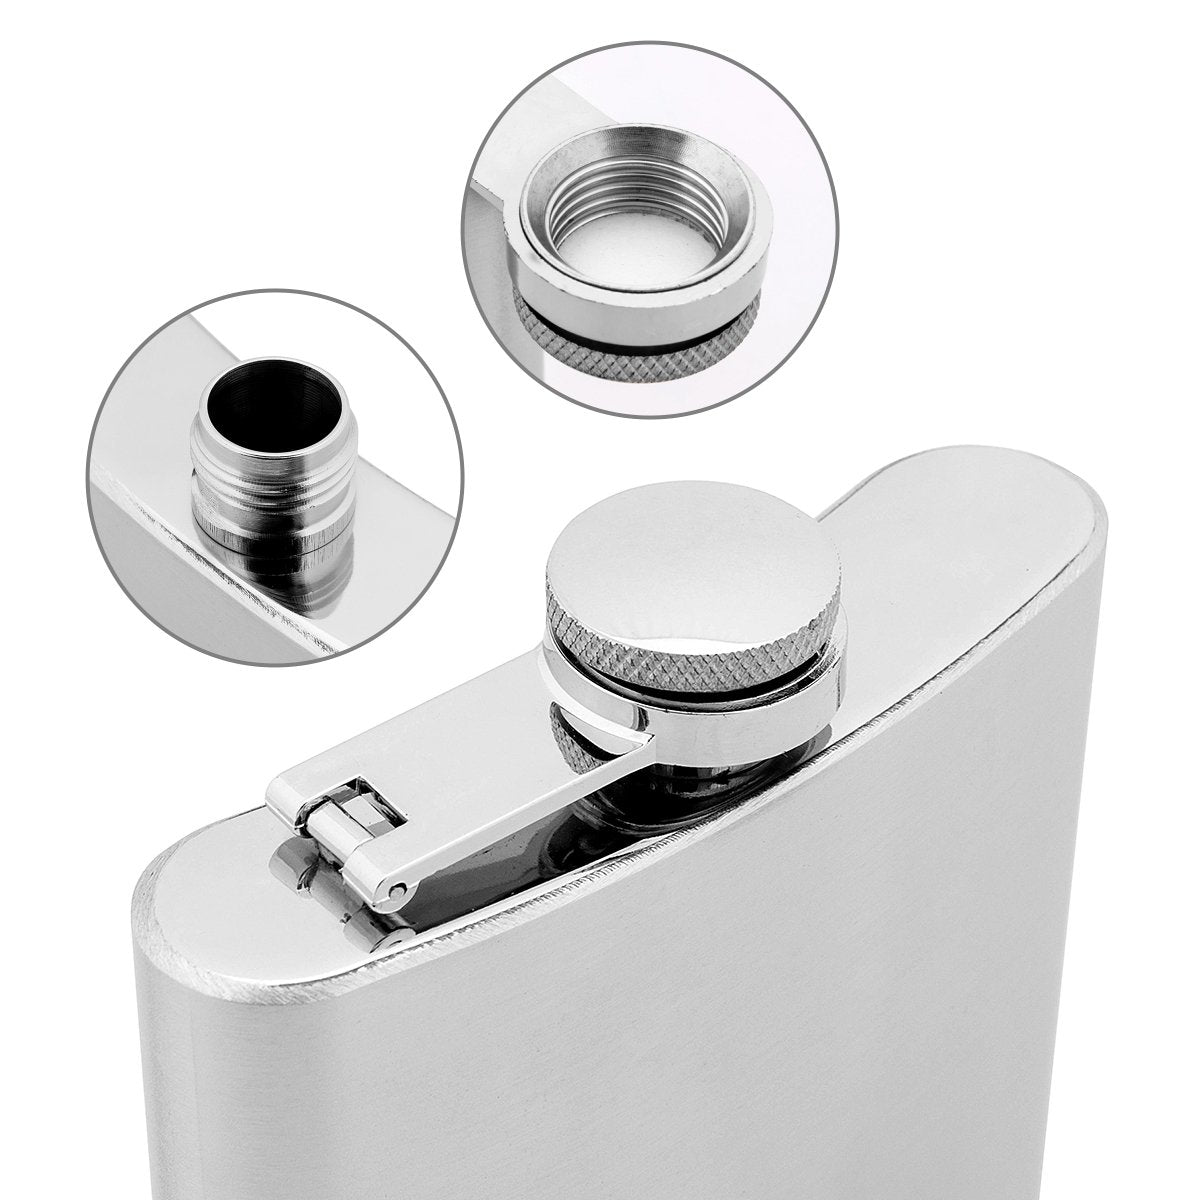 7 oz Silver Stainless Steel Hip Flask for Liquor